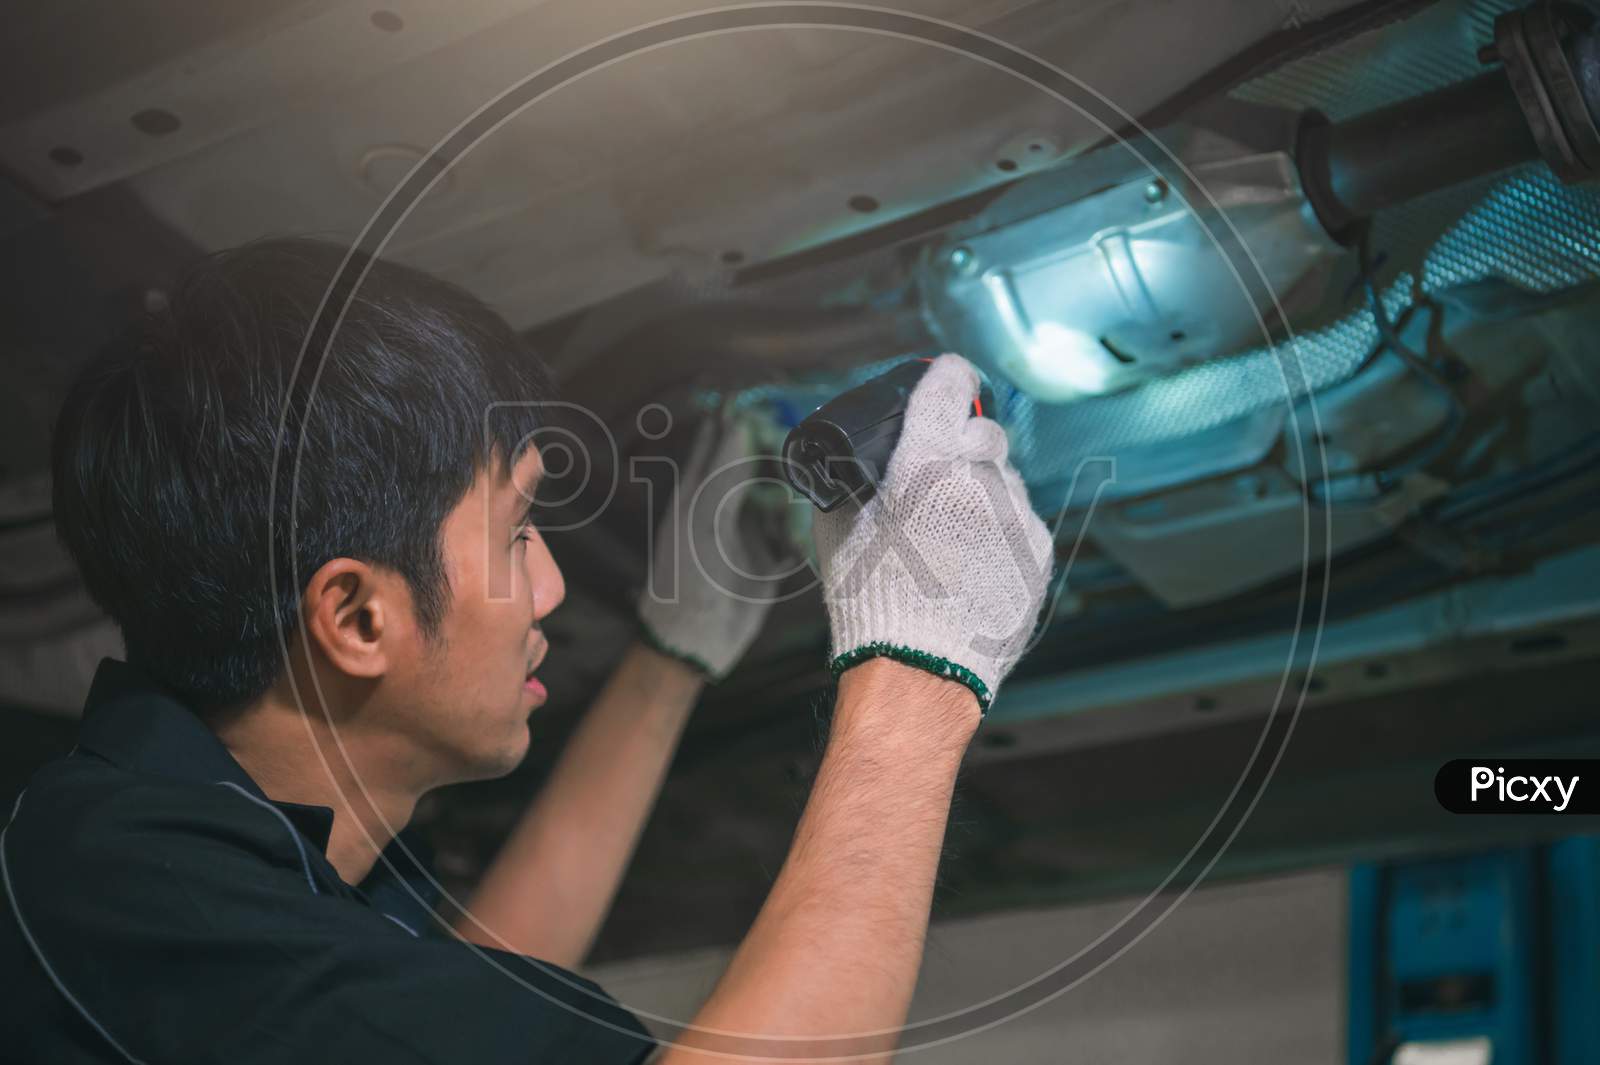 Asian Male Mechanical Hold And Shining Flashlight To Examine Car Under Chassis Of Automotive Vehicle. Safety Suspension Inspection Check Service Maintenance For Customer Before Road Trip Concept